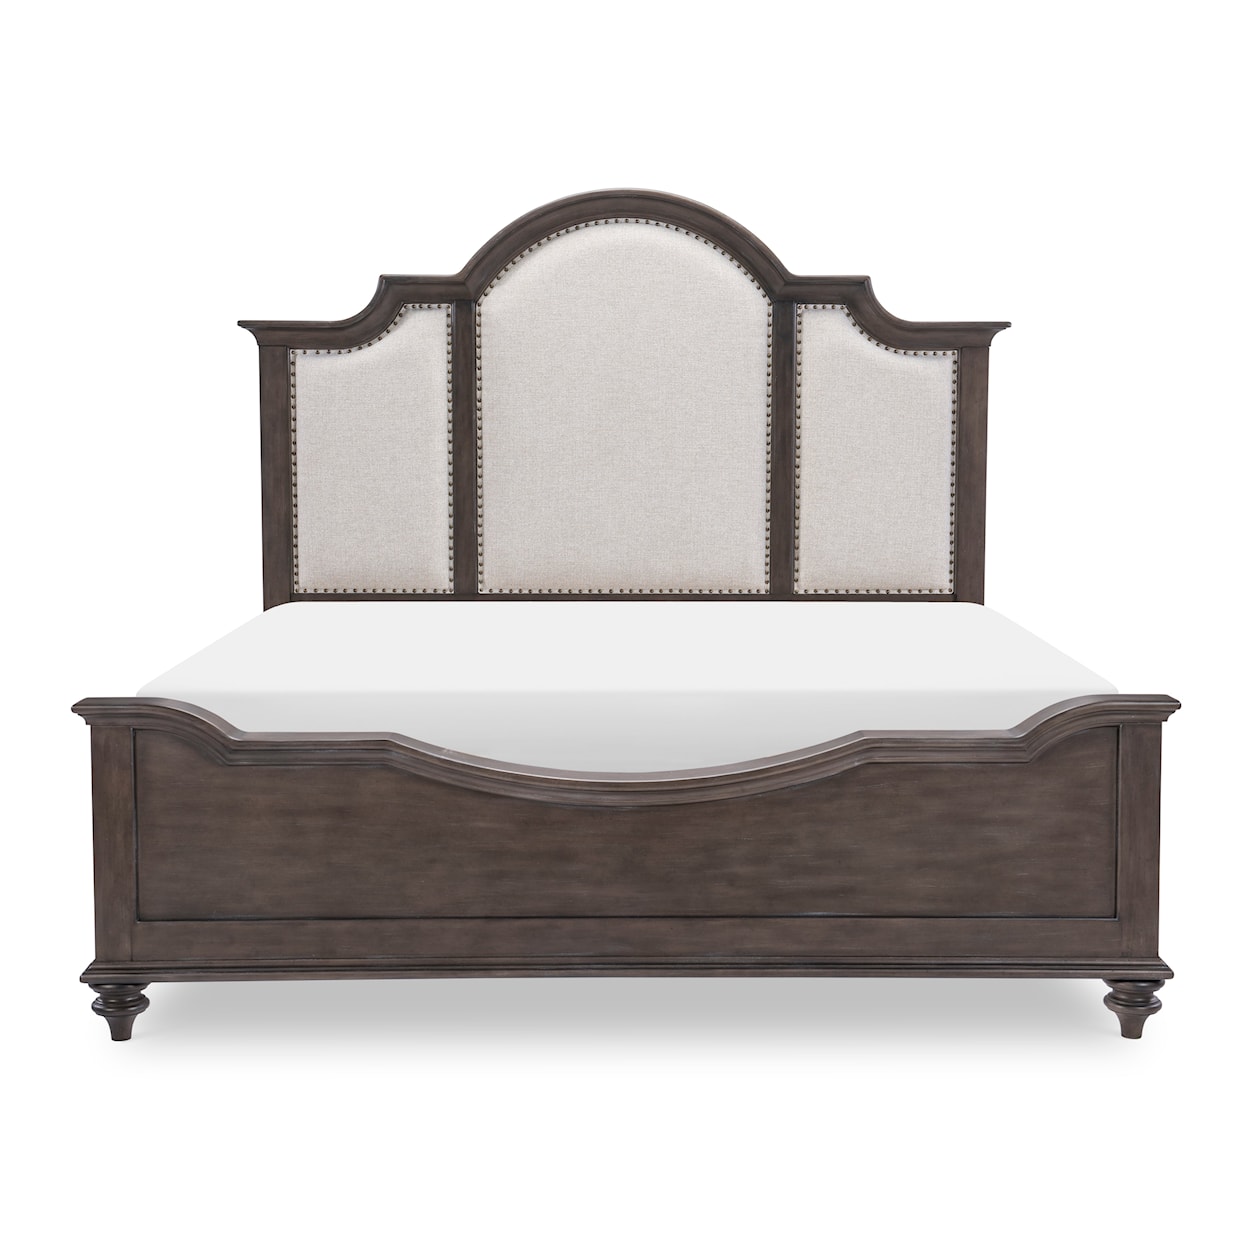 Legacy Classic Kingston Panel Bed